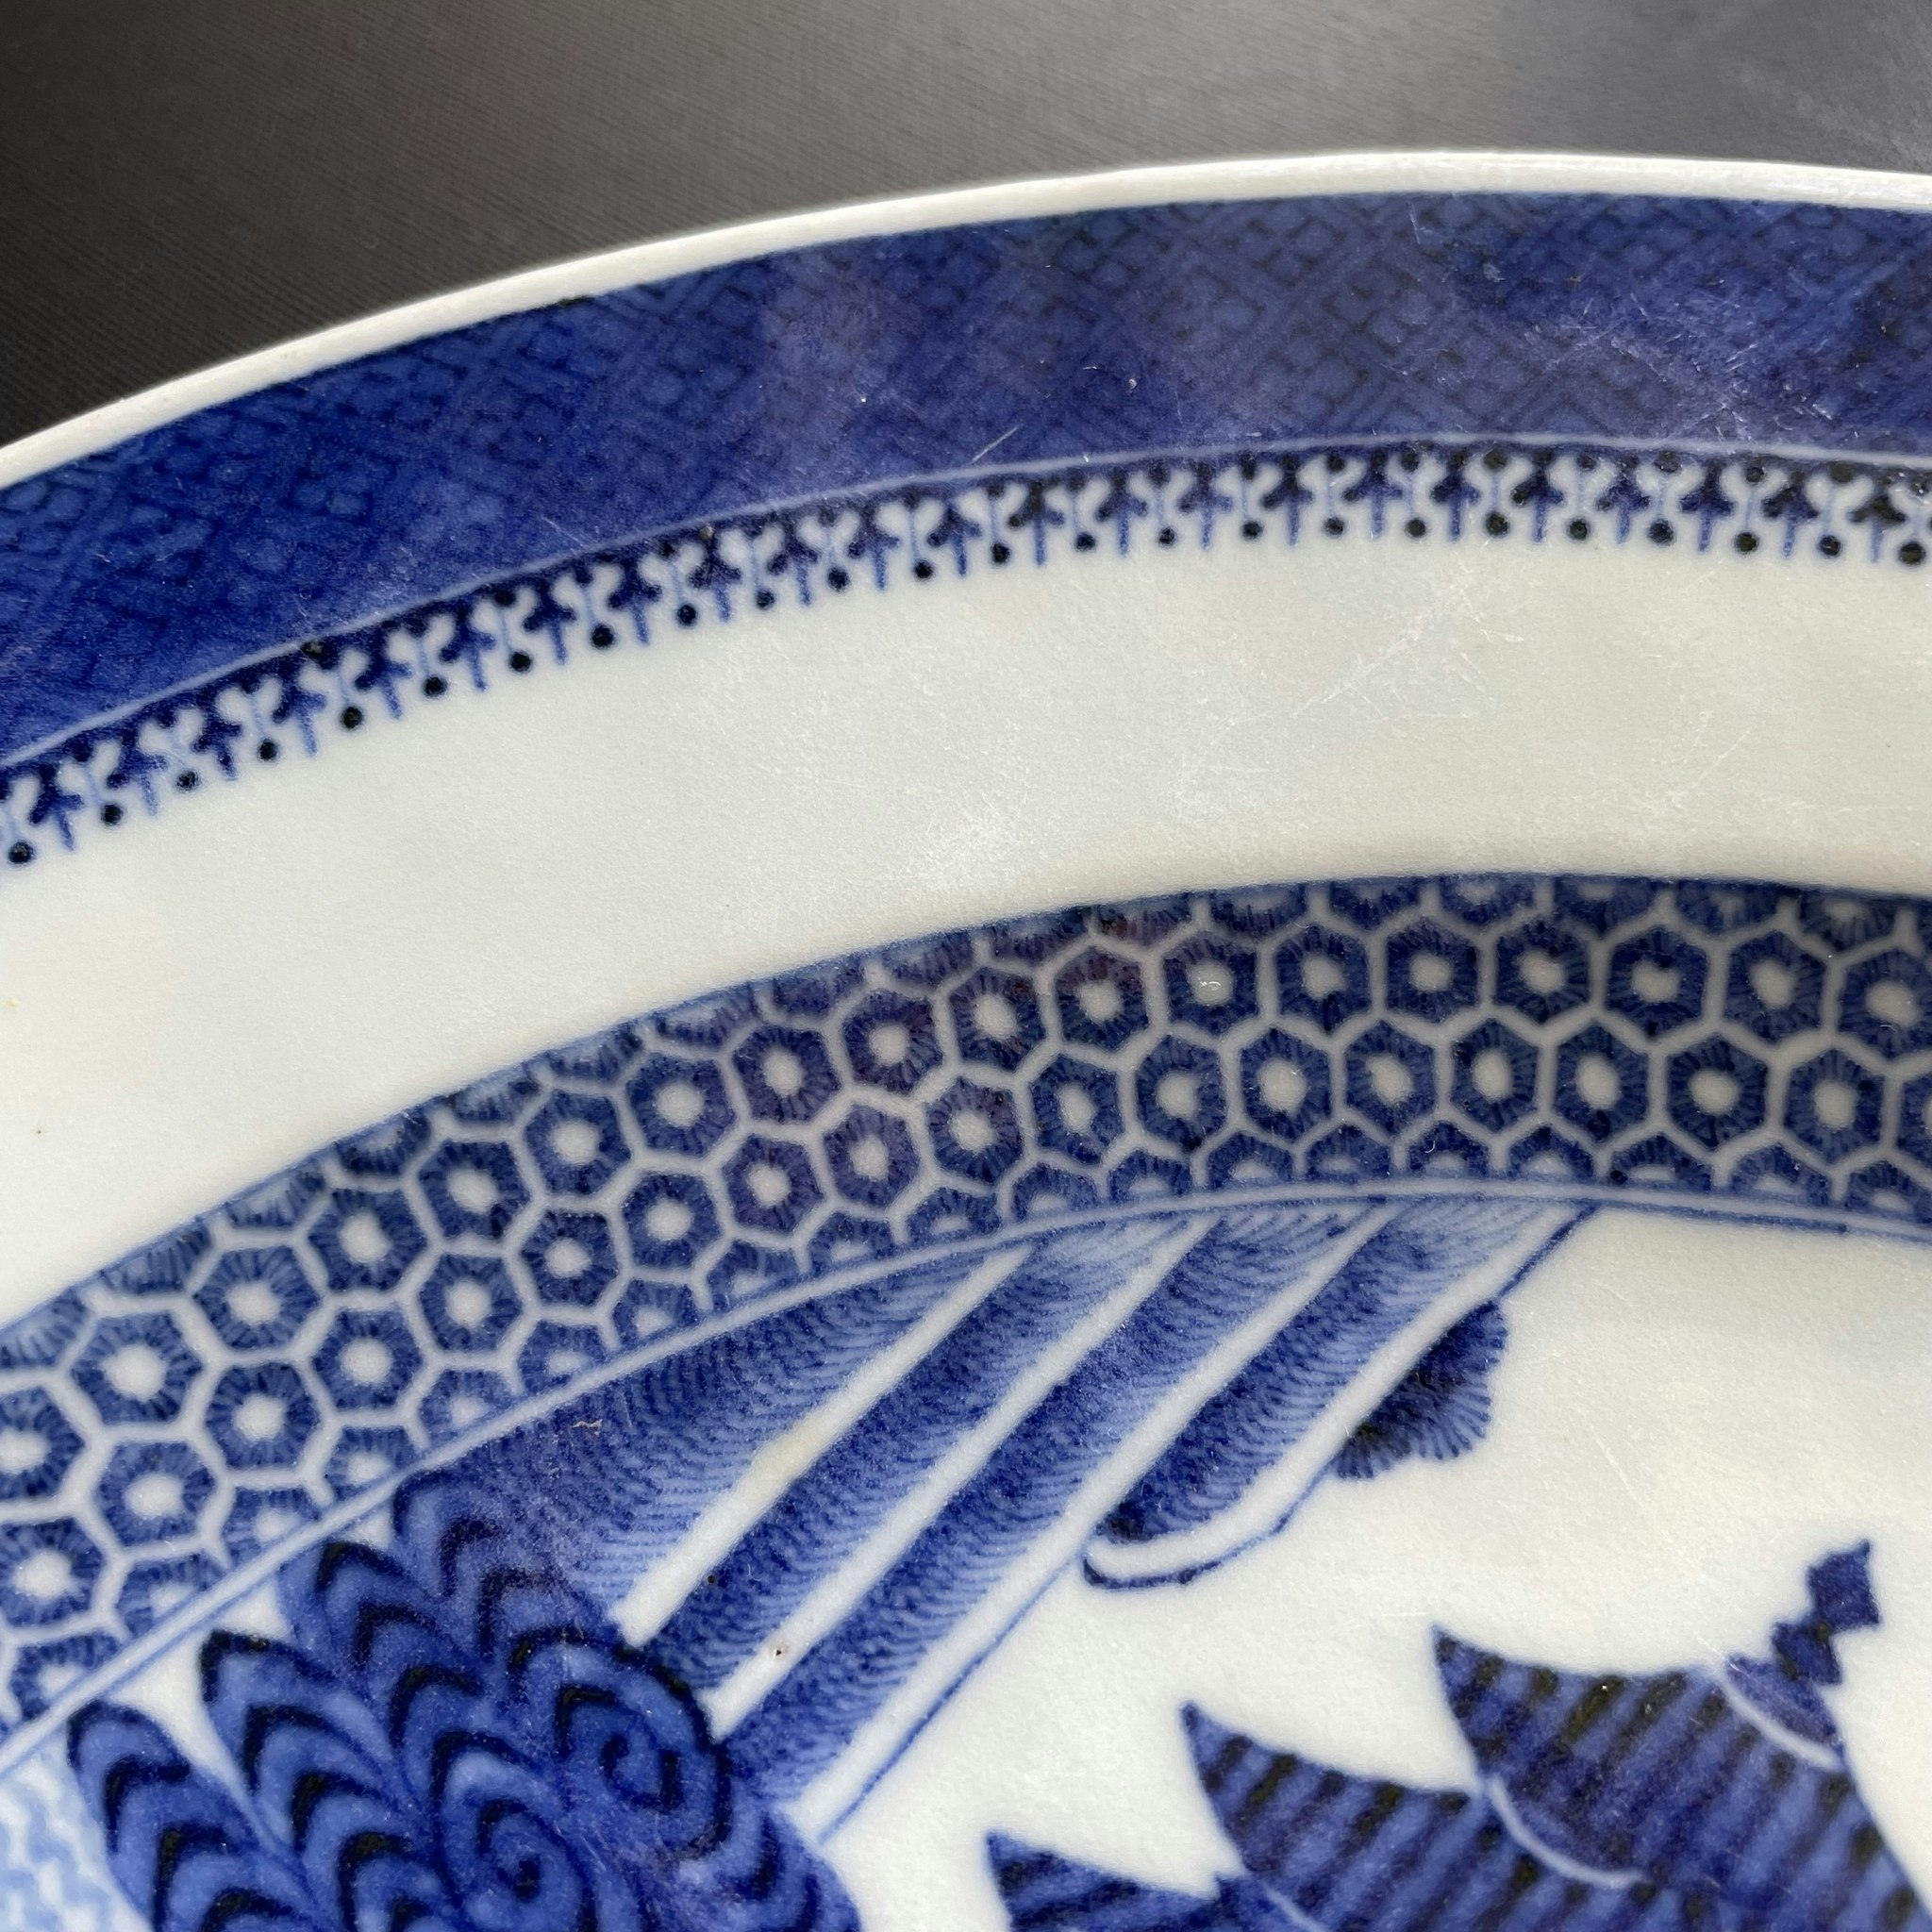 Antique Chinese Export Blue and White Porcelain platter, Qianlong period #1127